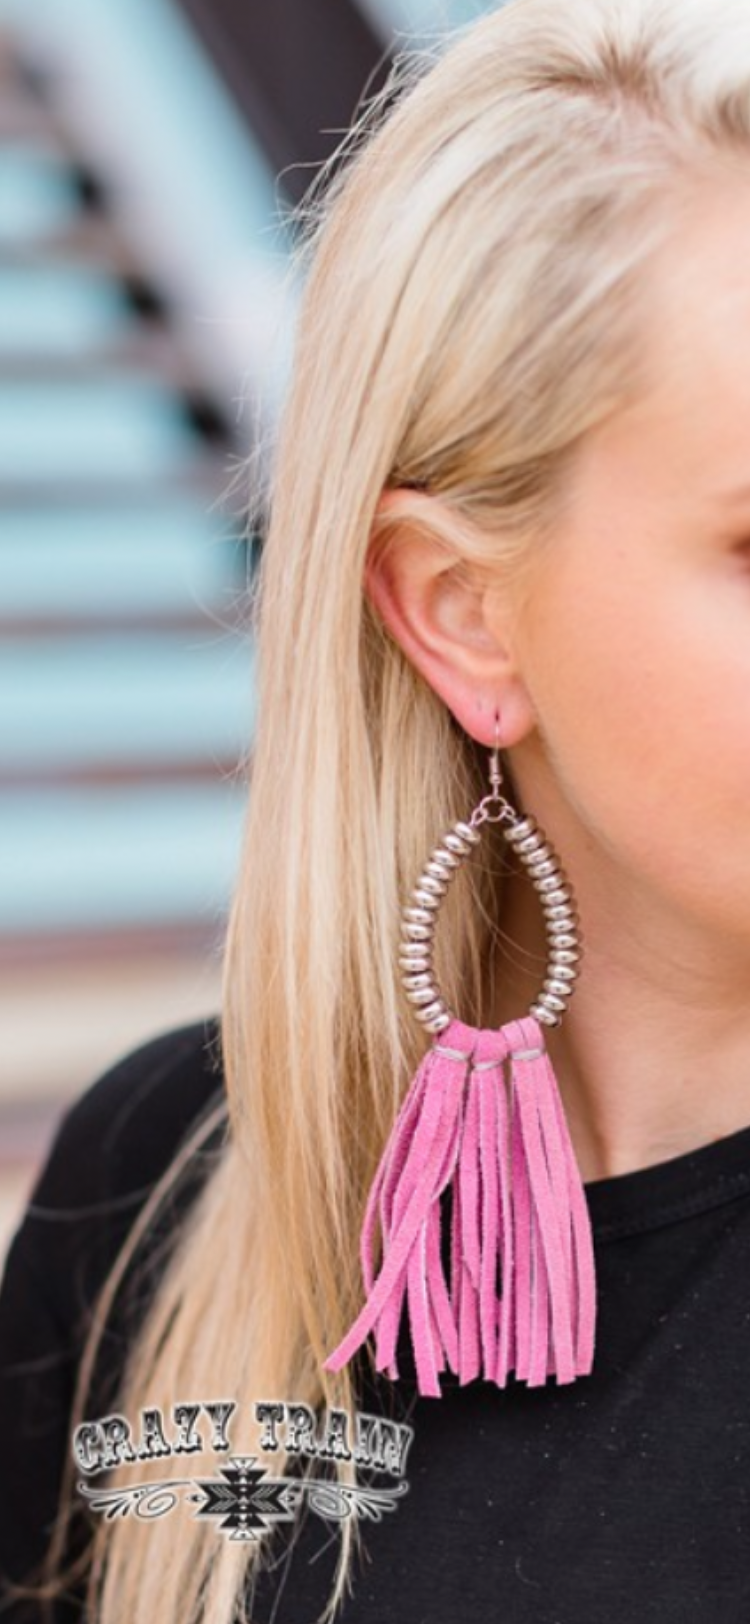 Pink Rio Grande Earrings by Crazy Train